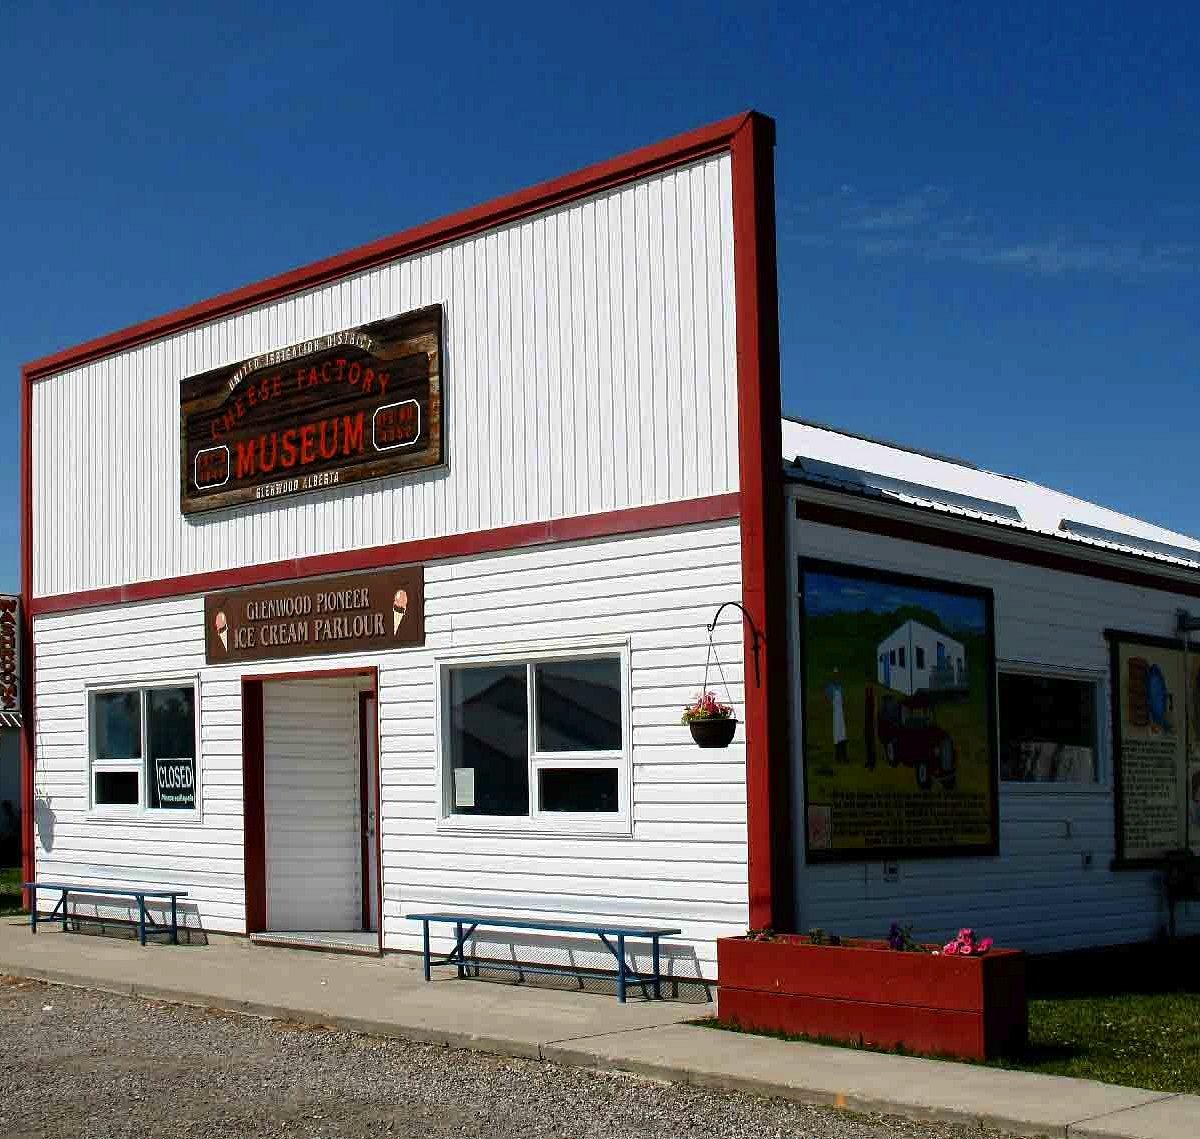 Glenwood Cheese Factory Museum: All You Need to Know